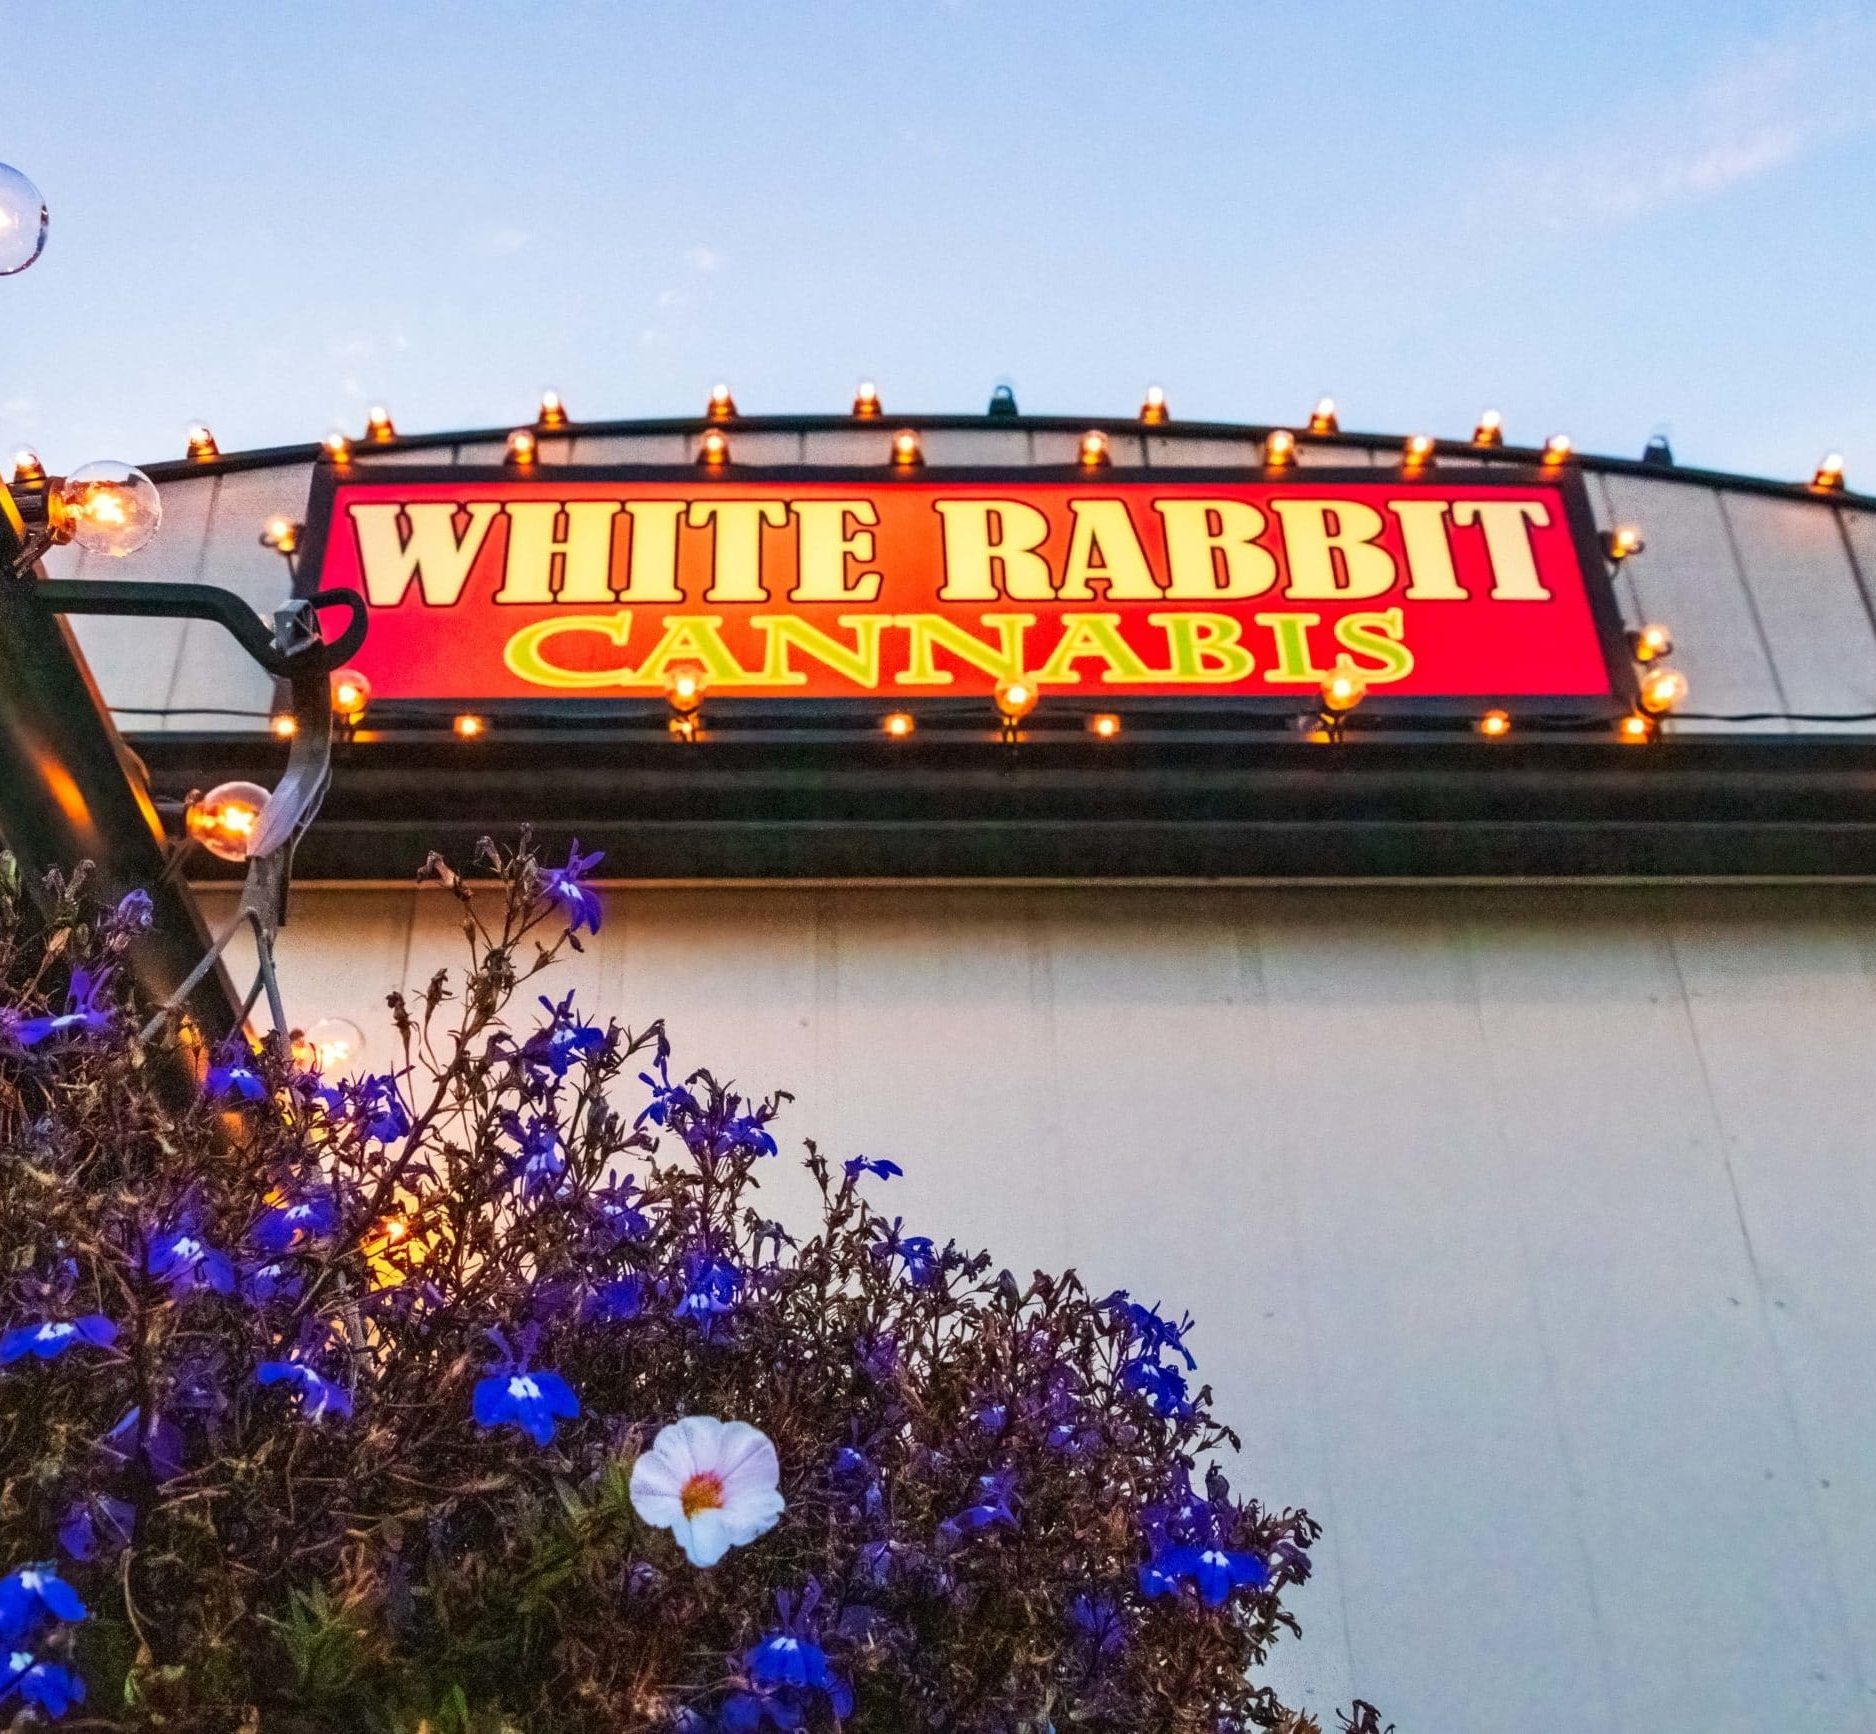 White Rabbit Cannabis Franchise flowers and sign